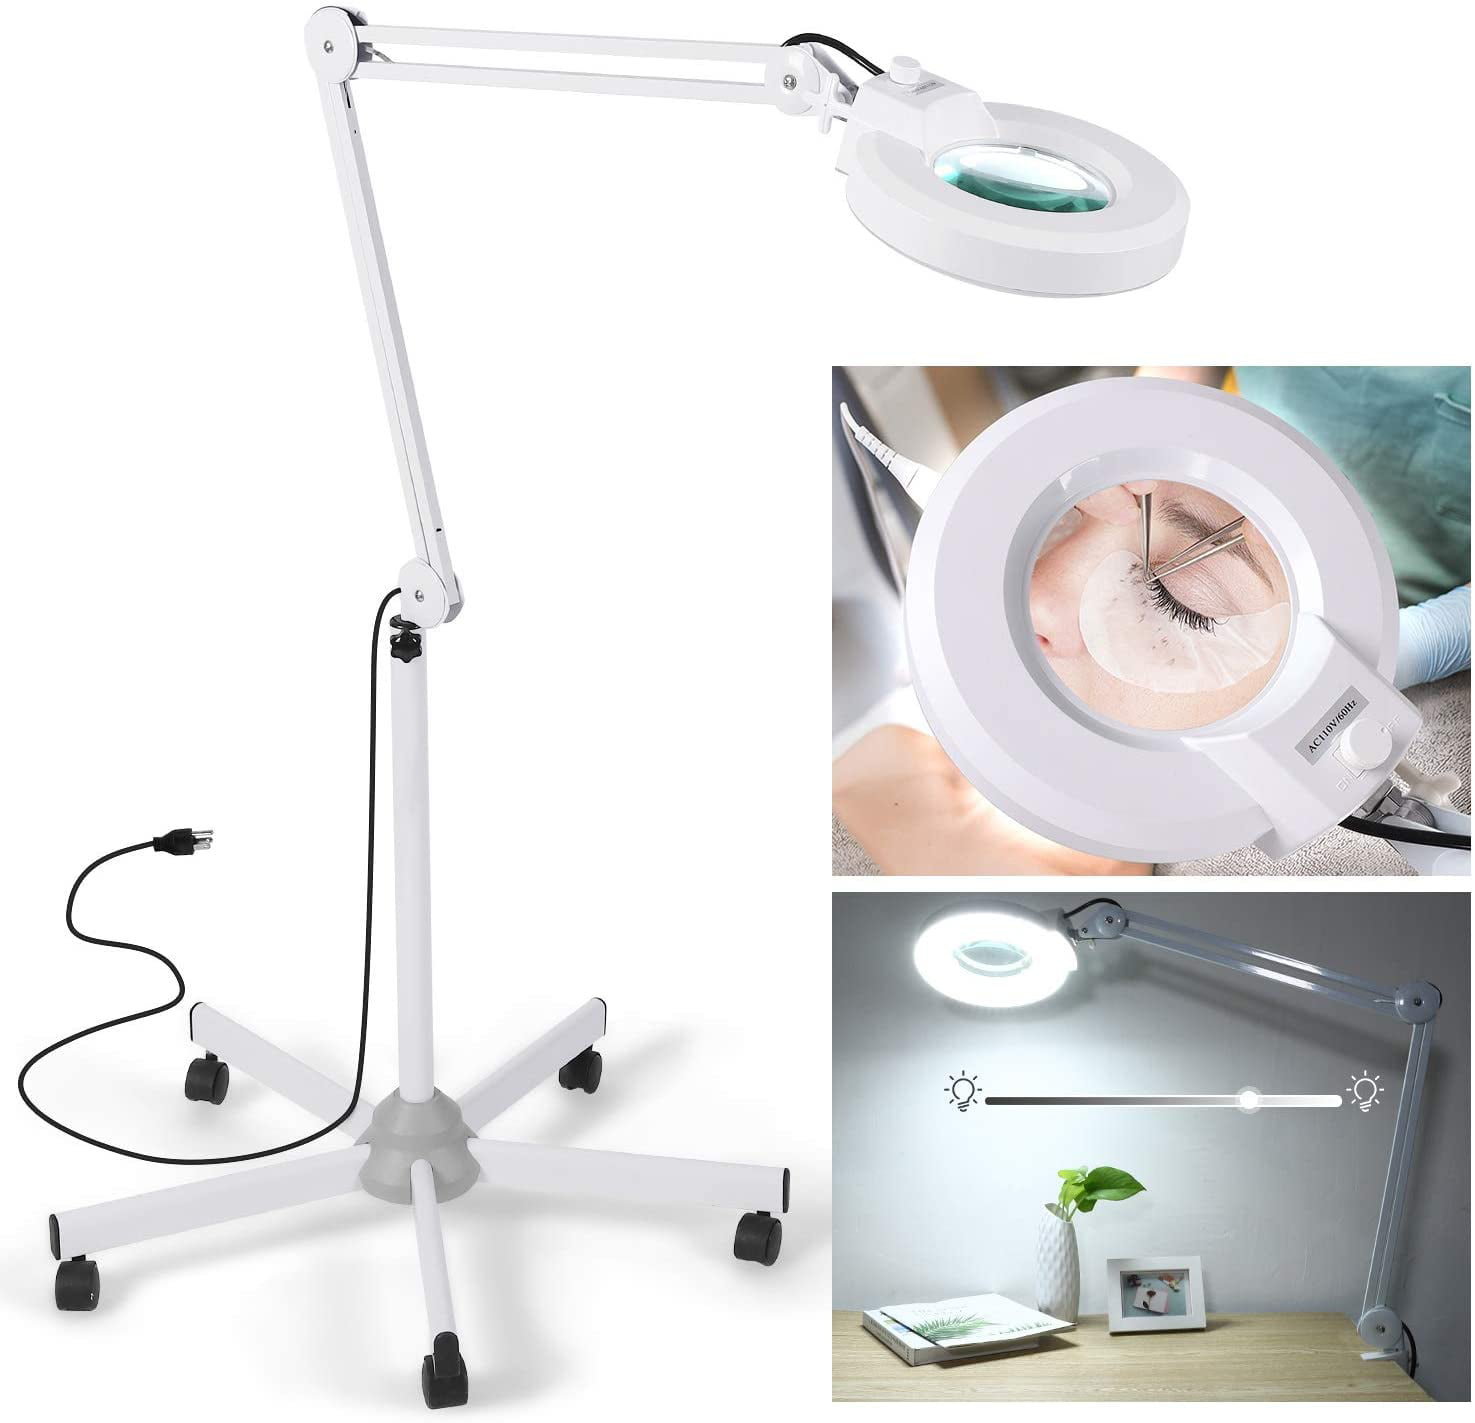 Magnifying Glass With Light,8X Magnification Bright Reading Floor lamp US Special Amplification Beauty Lamp for Tattoo Parlor Care,Beauty Craft & Task Lighting Adjustable & Dimmable Skin Care 